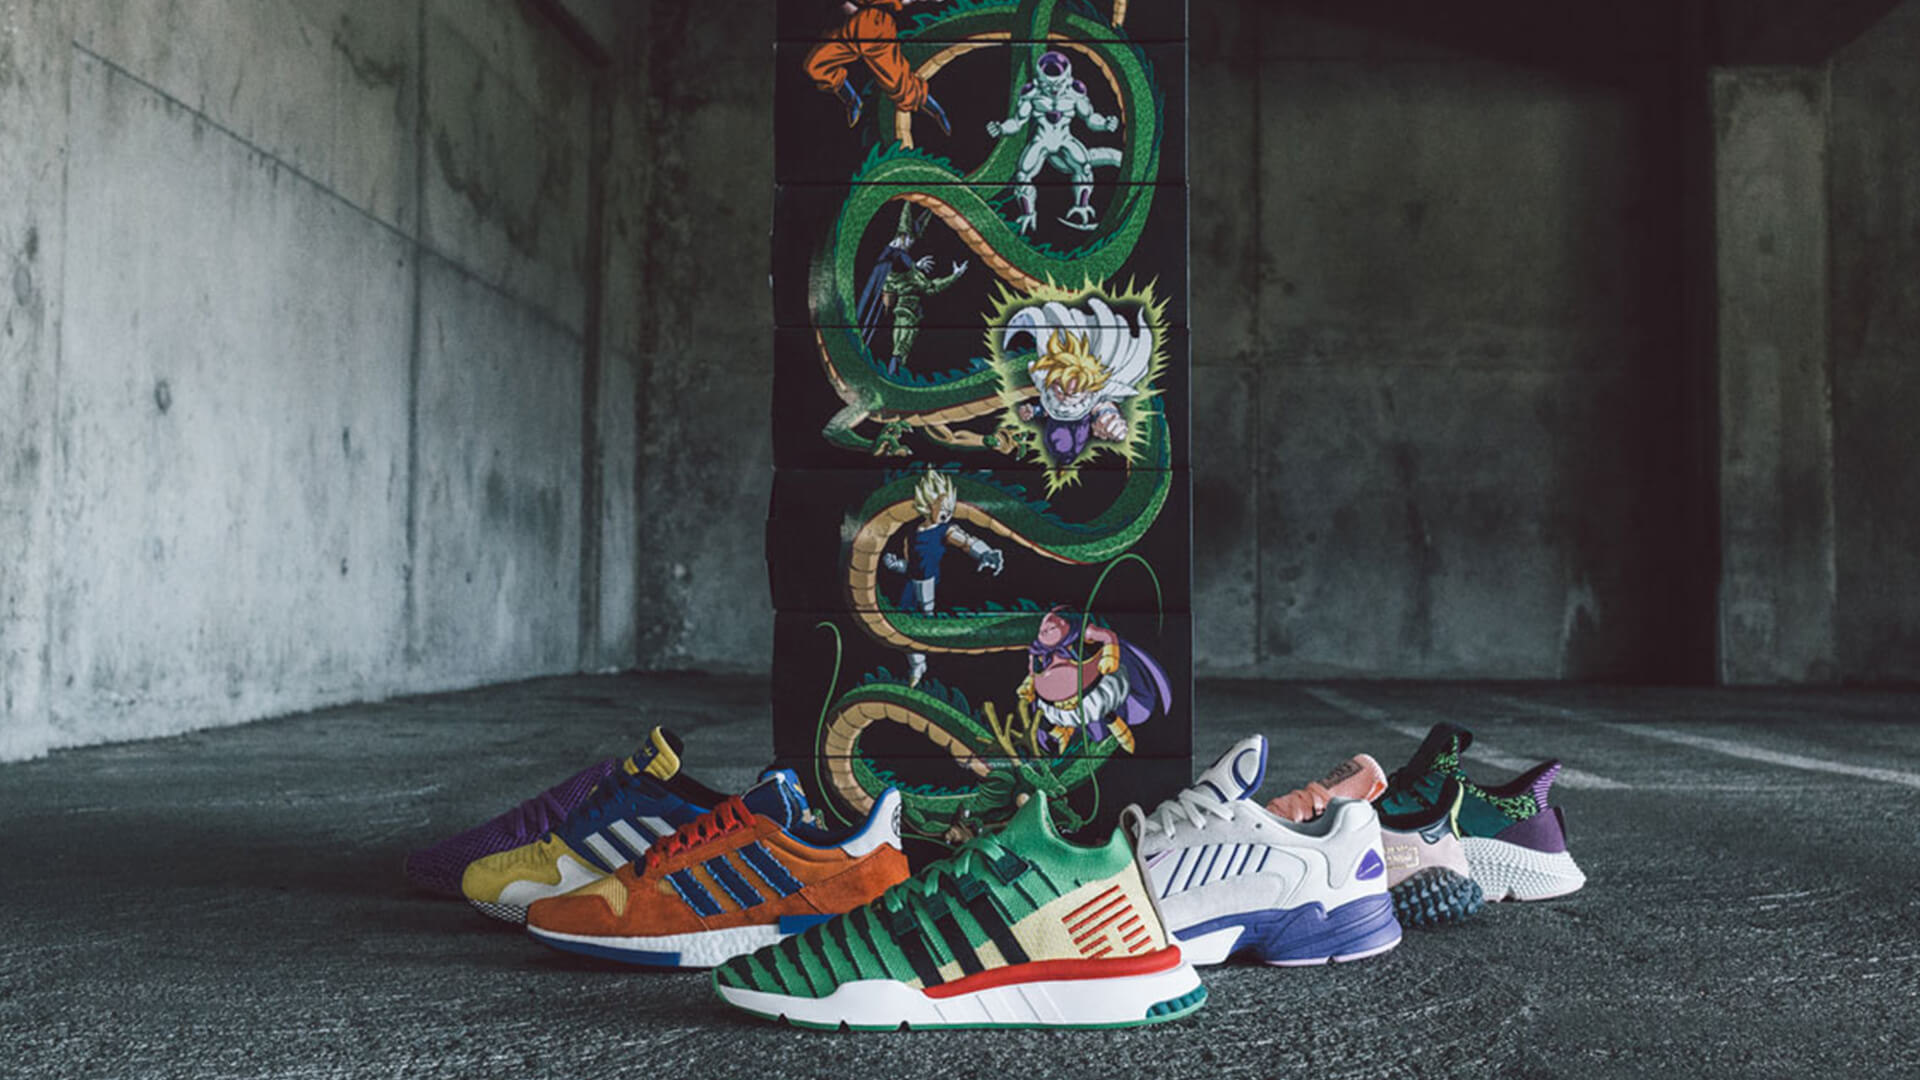 Purchase > dragon ball z adidas tenis, Up to 69% OFF